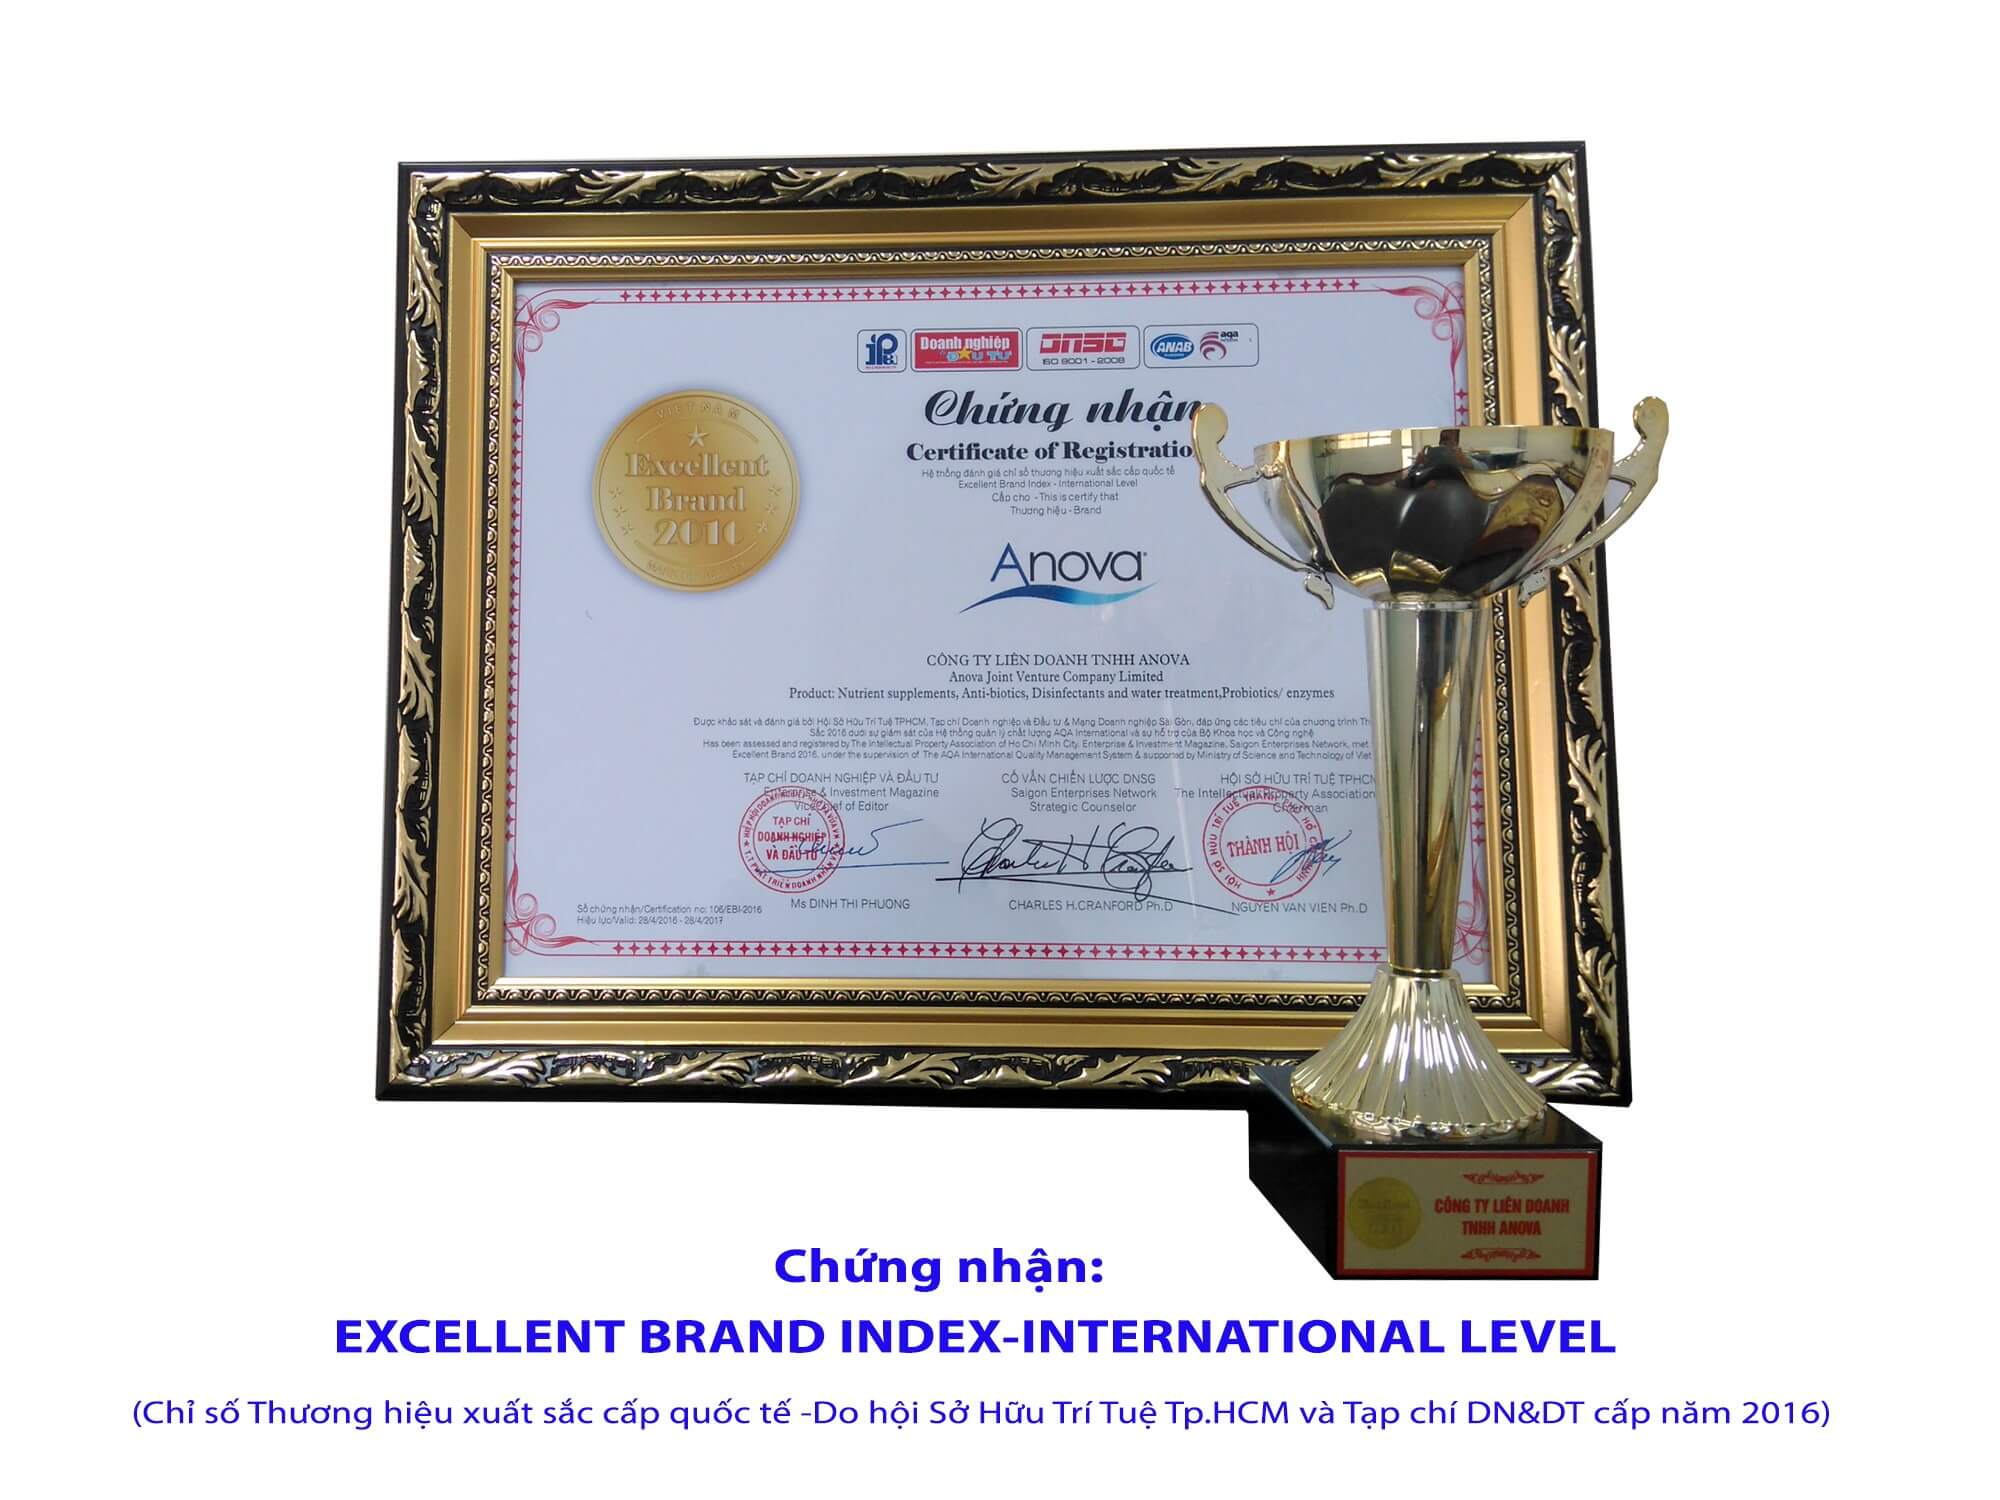 Certification: Excellent Brand Index-International Level - Issued by Ho Chi Minh City Intellectual Property Association and Business & Investing Magazine in 2016